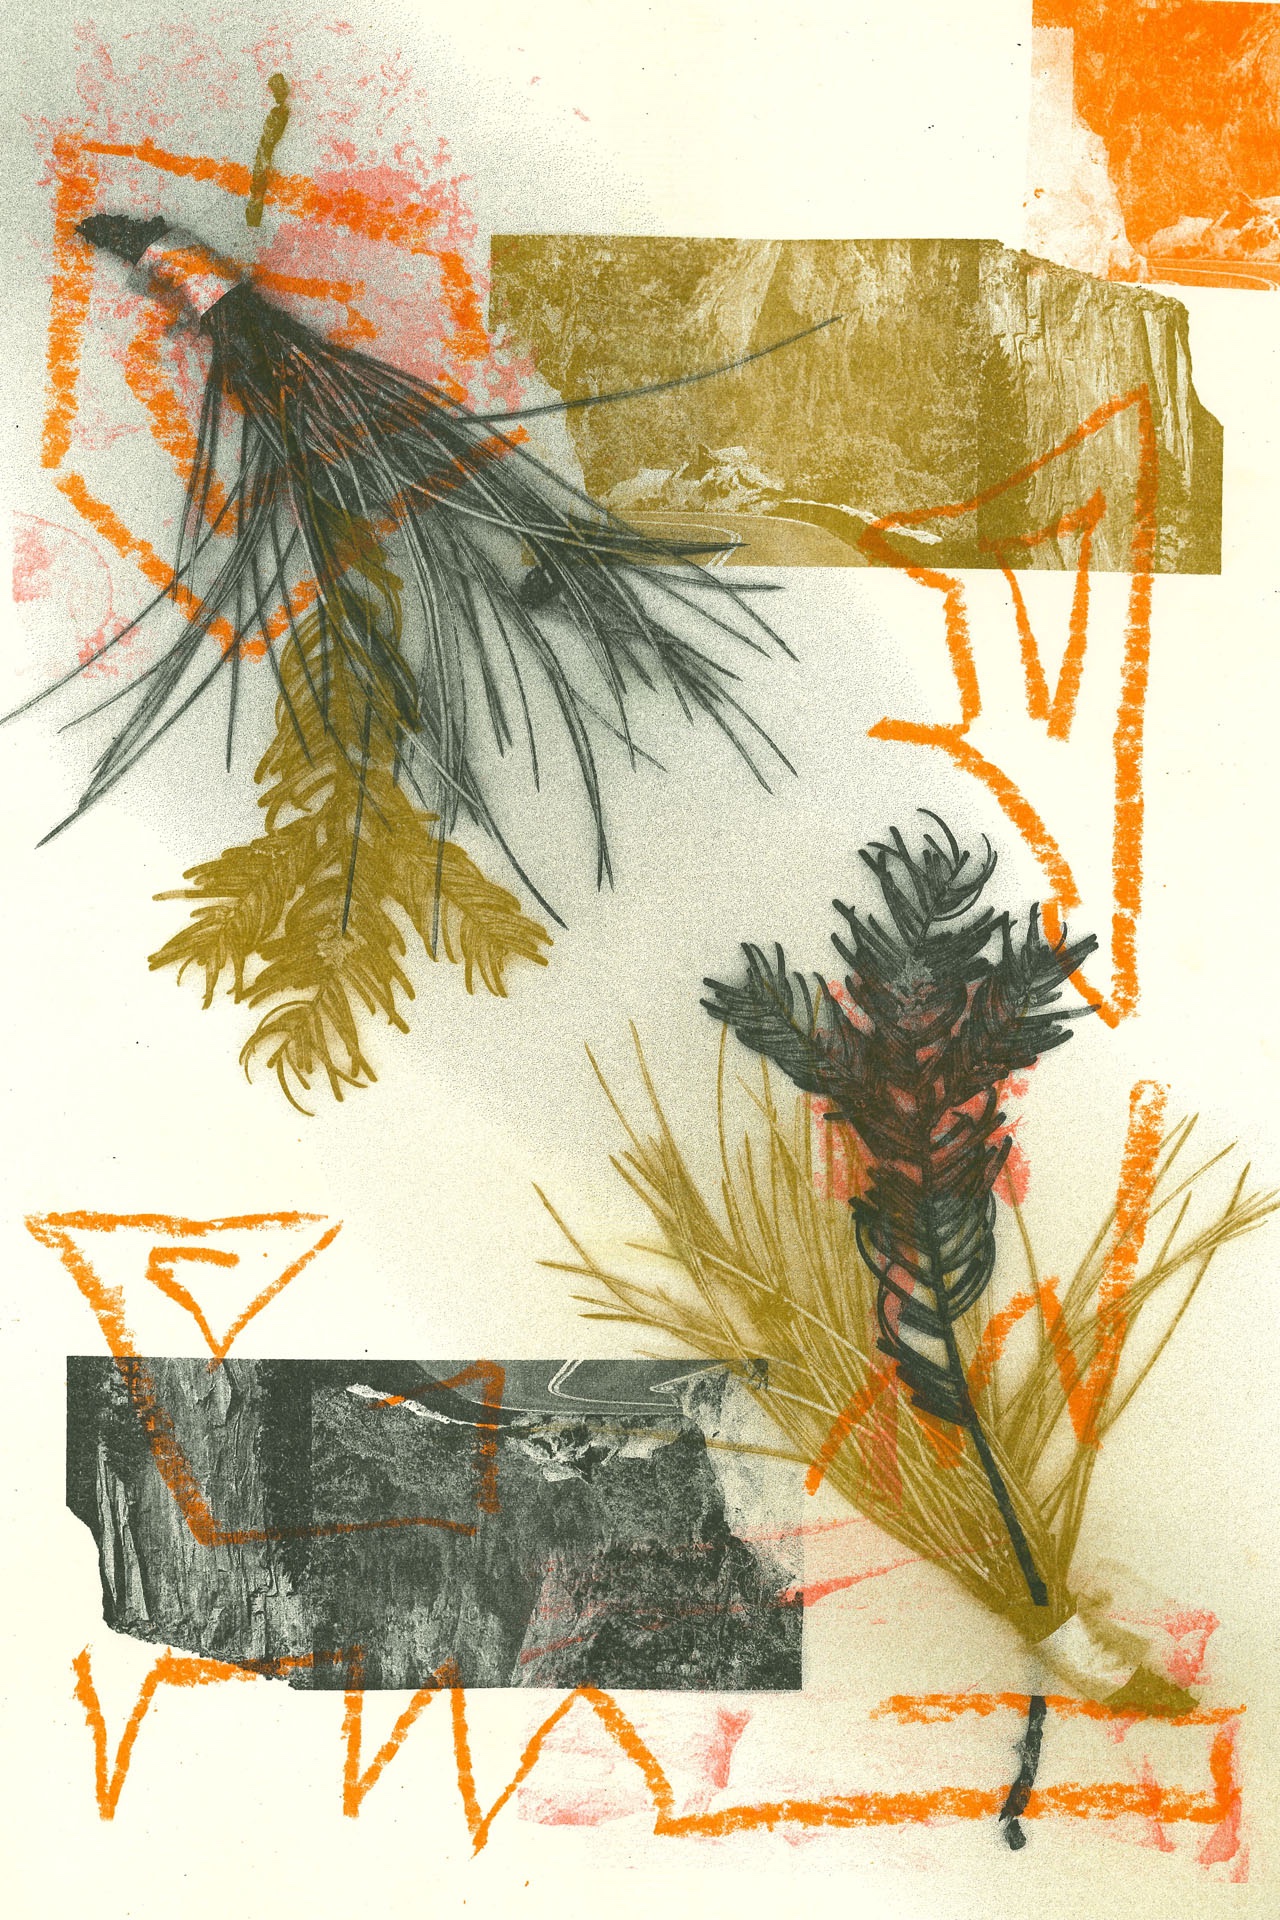 Orange wax crayon spirals over a mirrored collage of photographic Yosemite imagery and bundles of pine needles. 